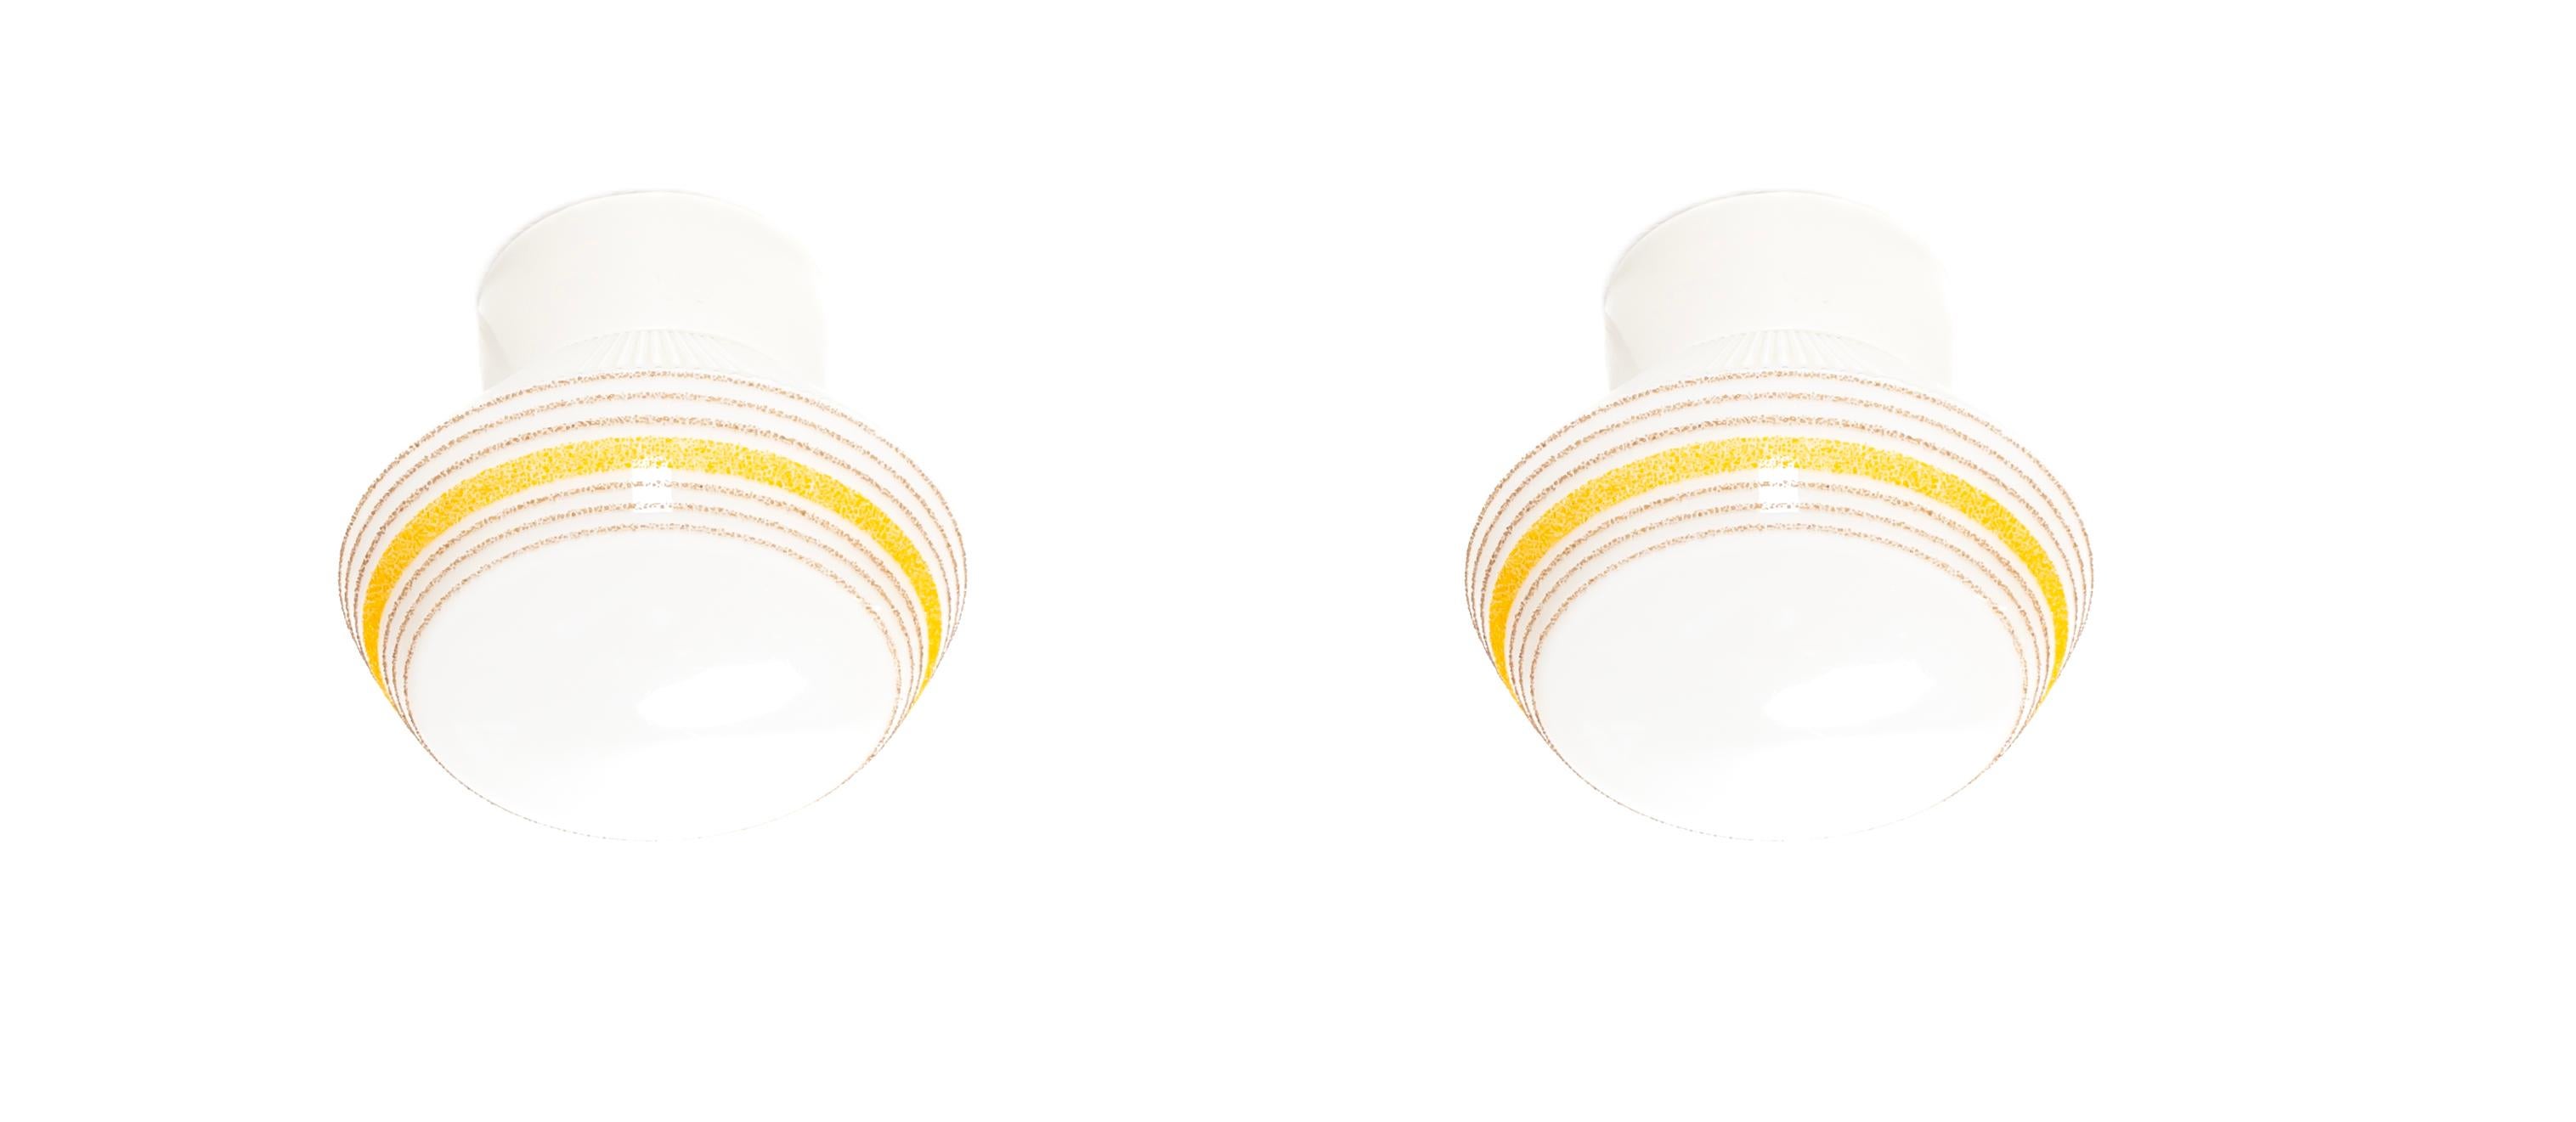 Wonderful pair of ceiling lights on a porcelain base with shades in decorated opaline glass. Designed and made in Norway from circa 1950s first half by Høvik Lys. Both lamps are fully working and in good vintage condition. Each lamp utilize one E27